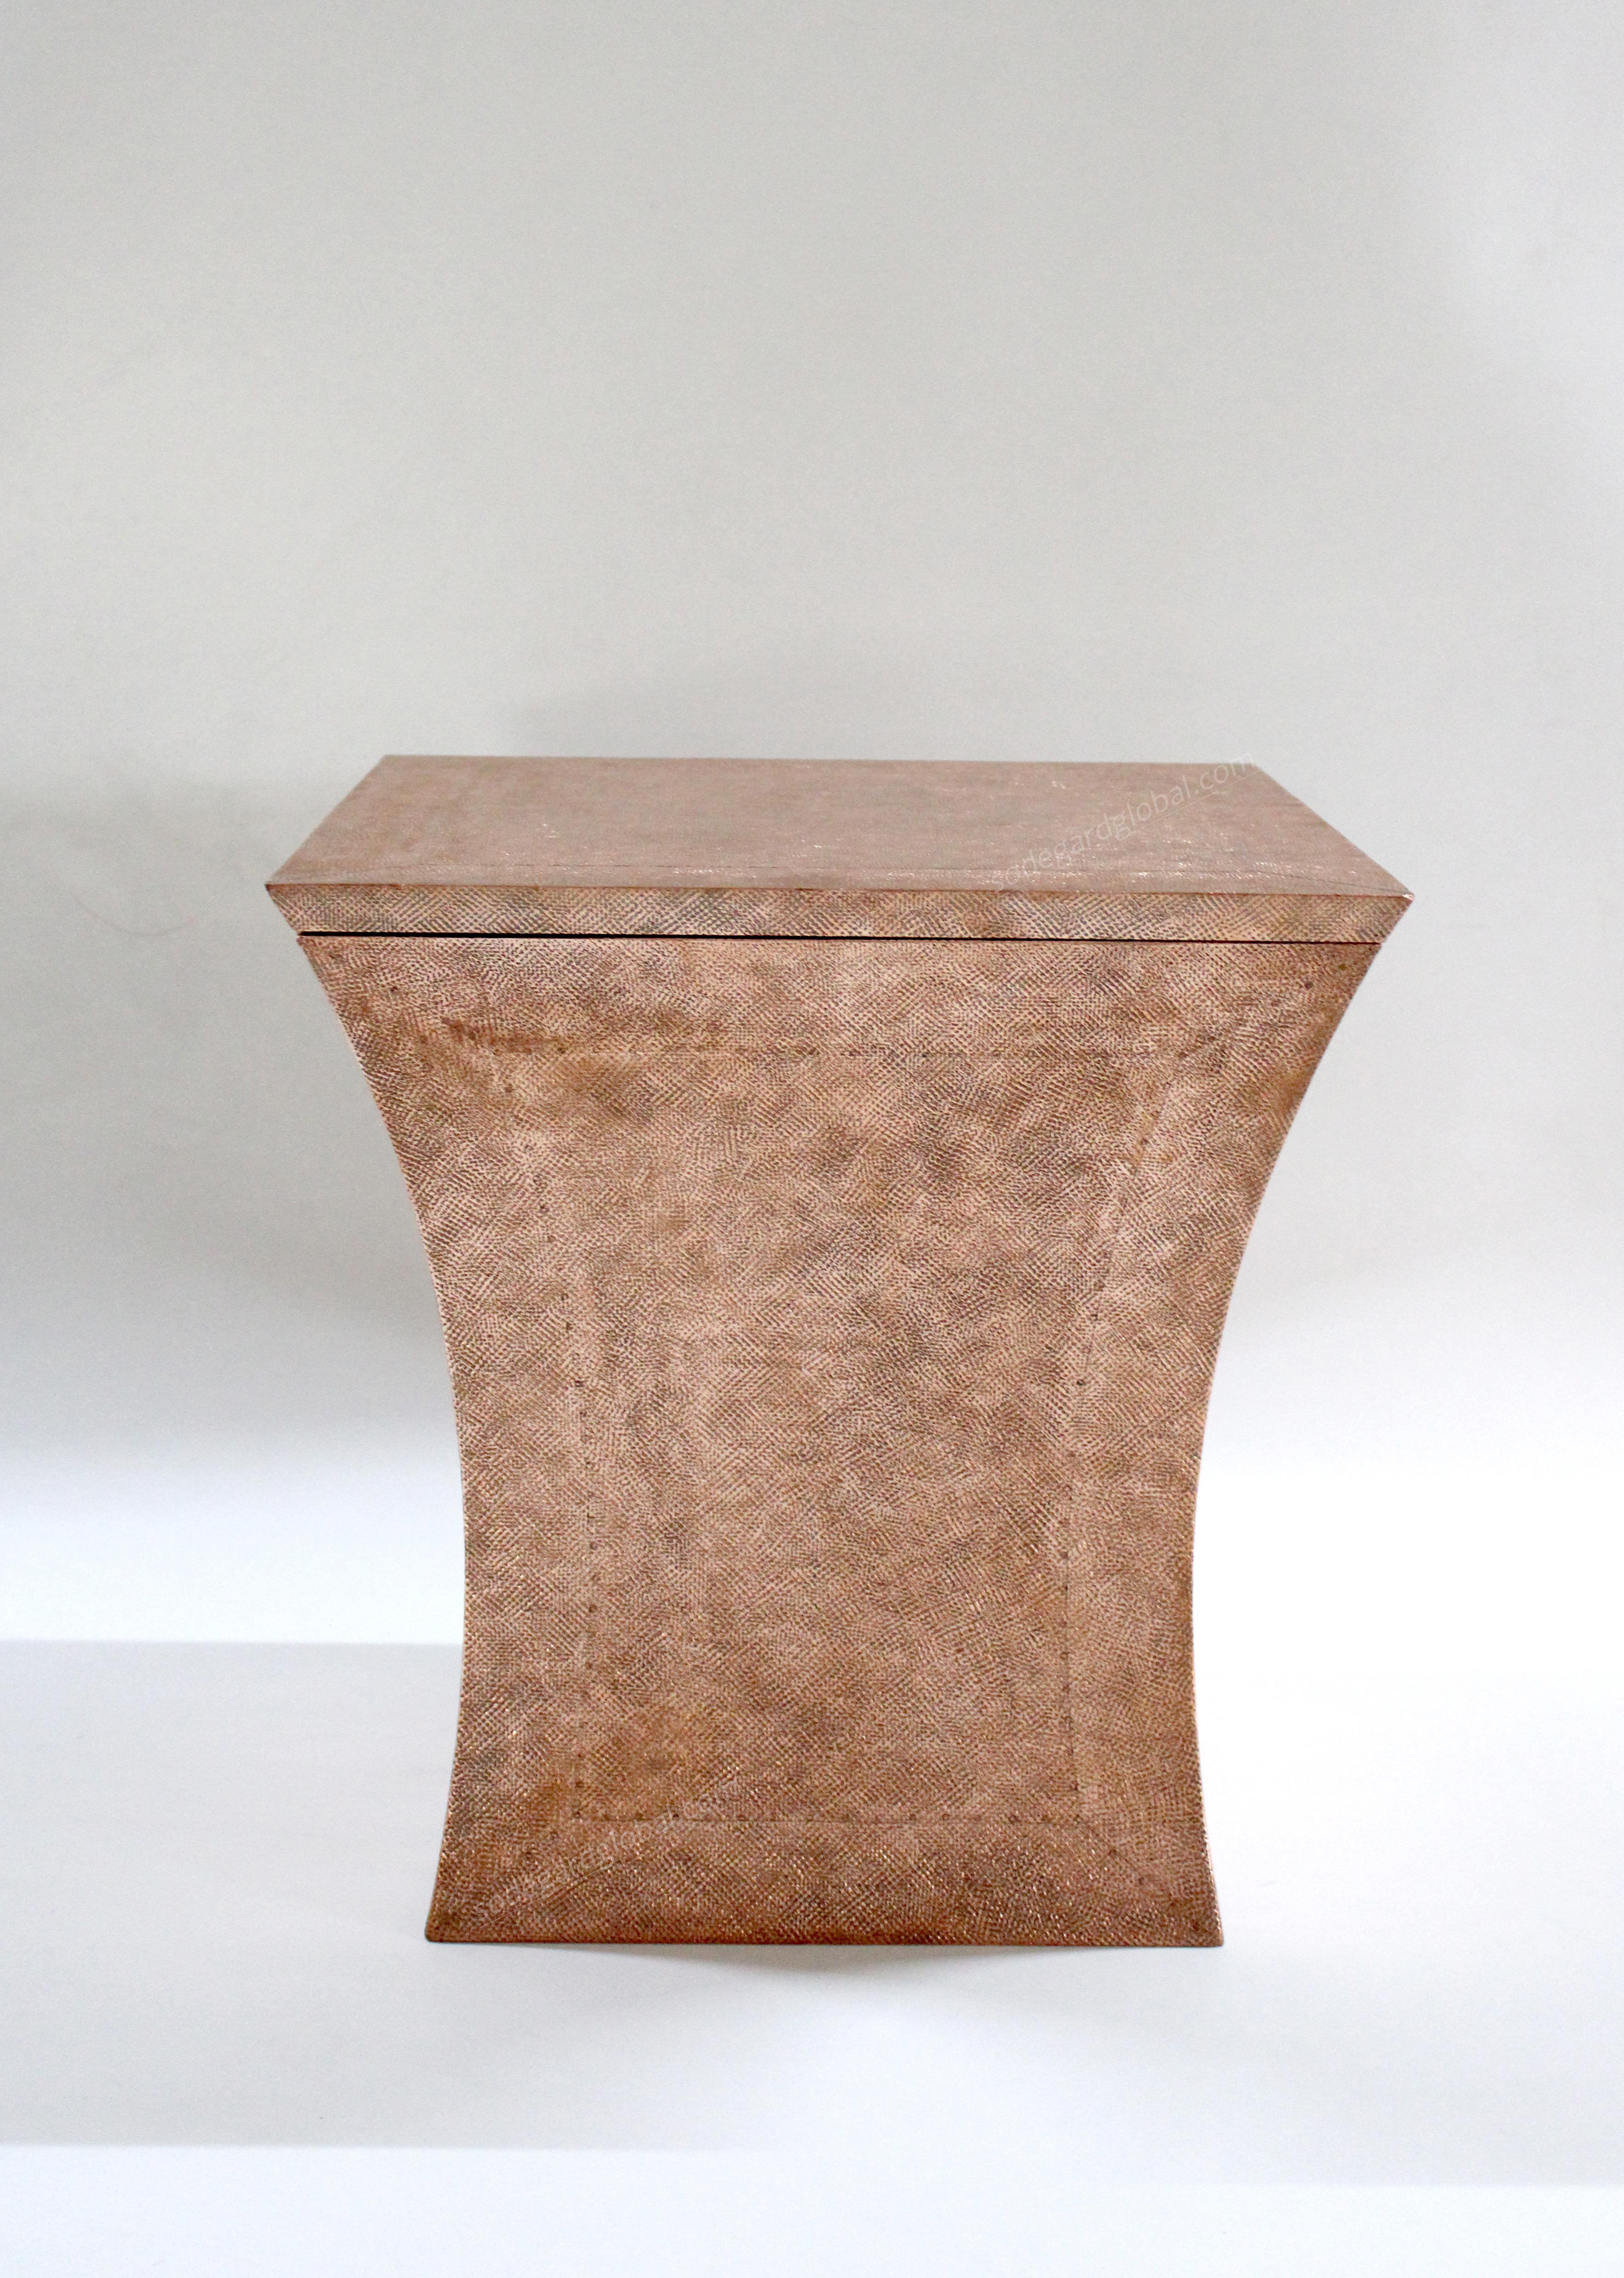 Set of Two Vaisseau Side Tables in Copper Clad Over Wood by Paul Mathieu For Sale 5